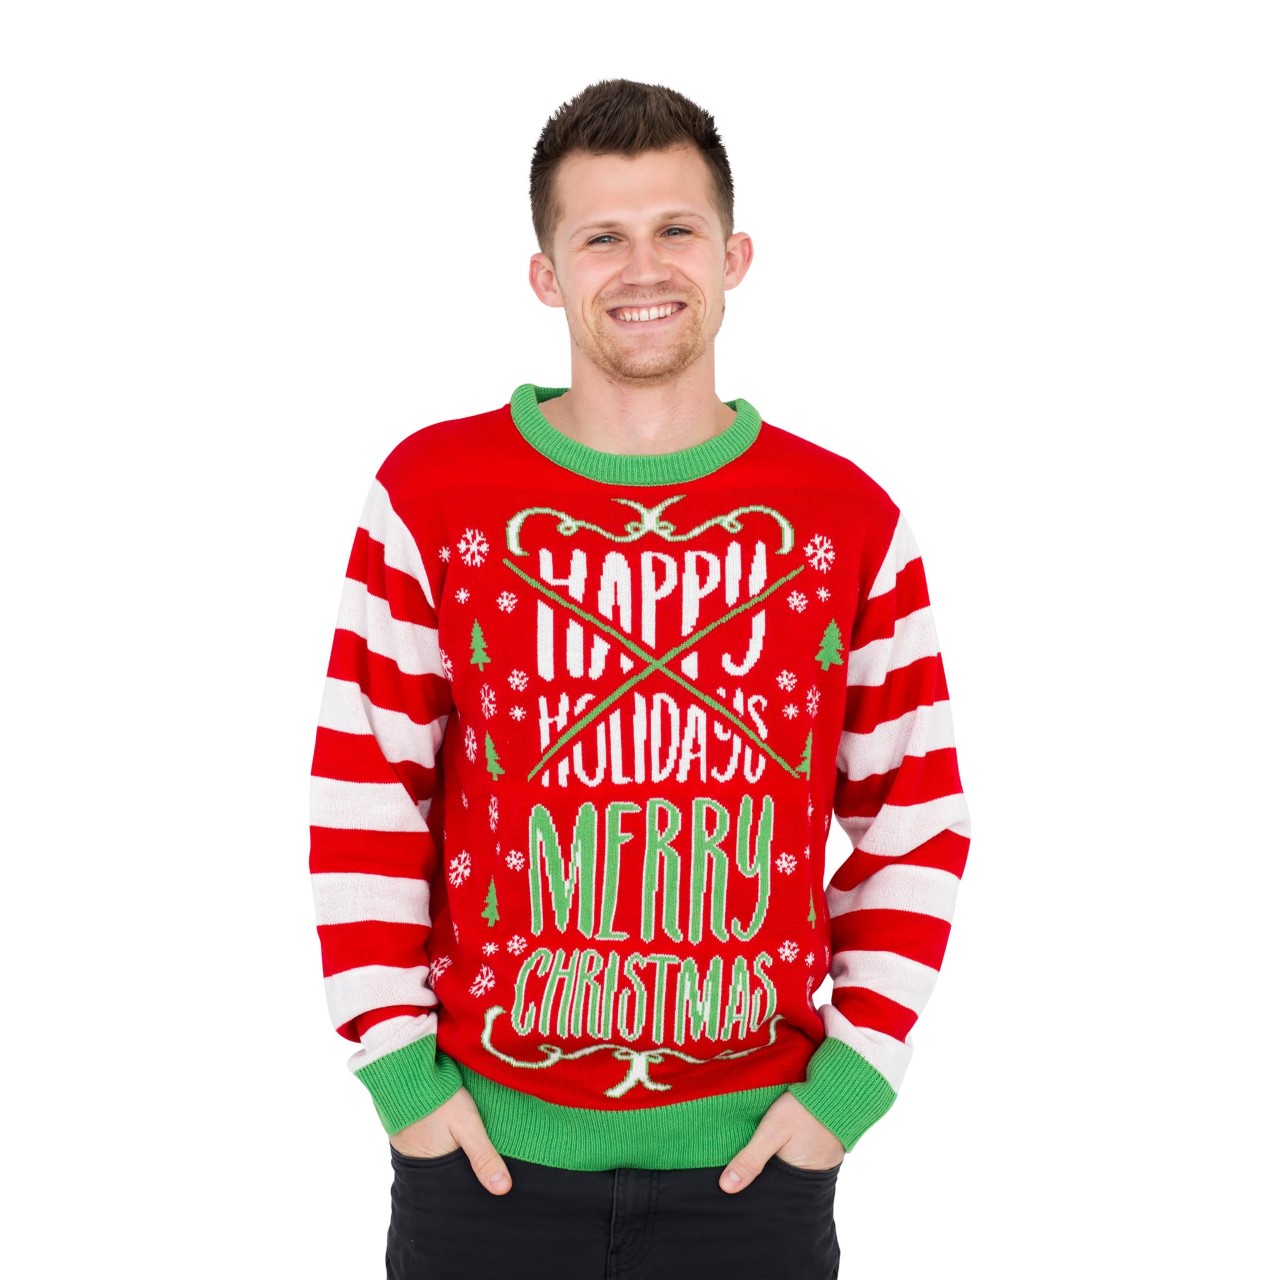 Happy Holidays Merry Christmas Sweater,New Products : uglyschristmassweater.com